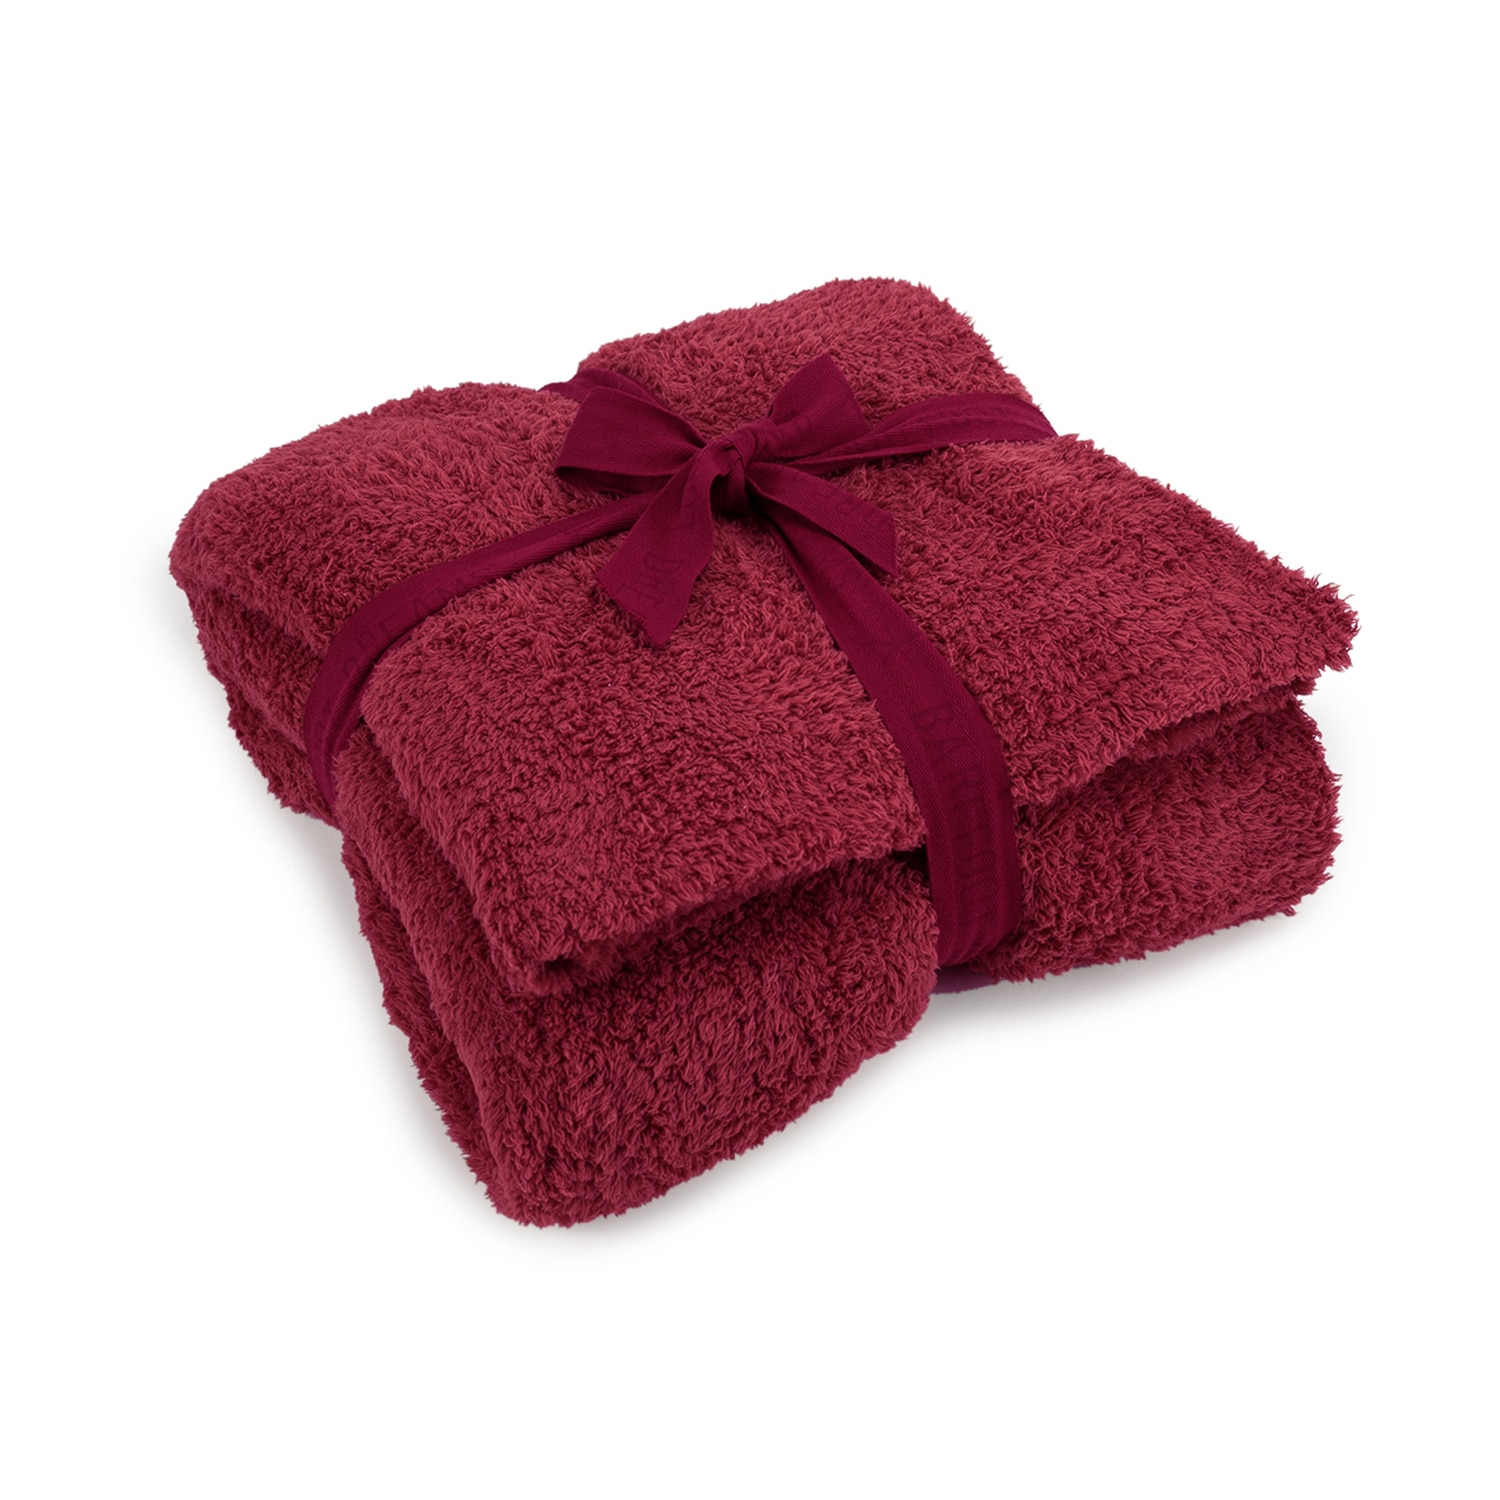 Barefoot Dreams CozyChic Throw Cranberry